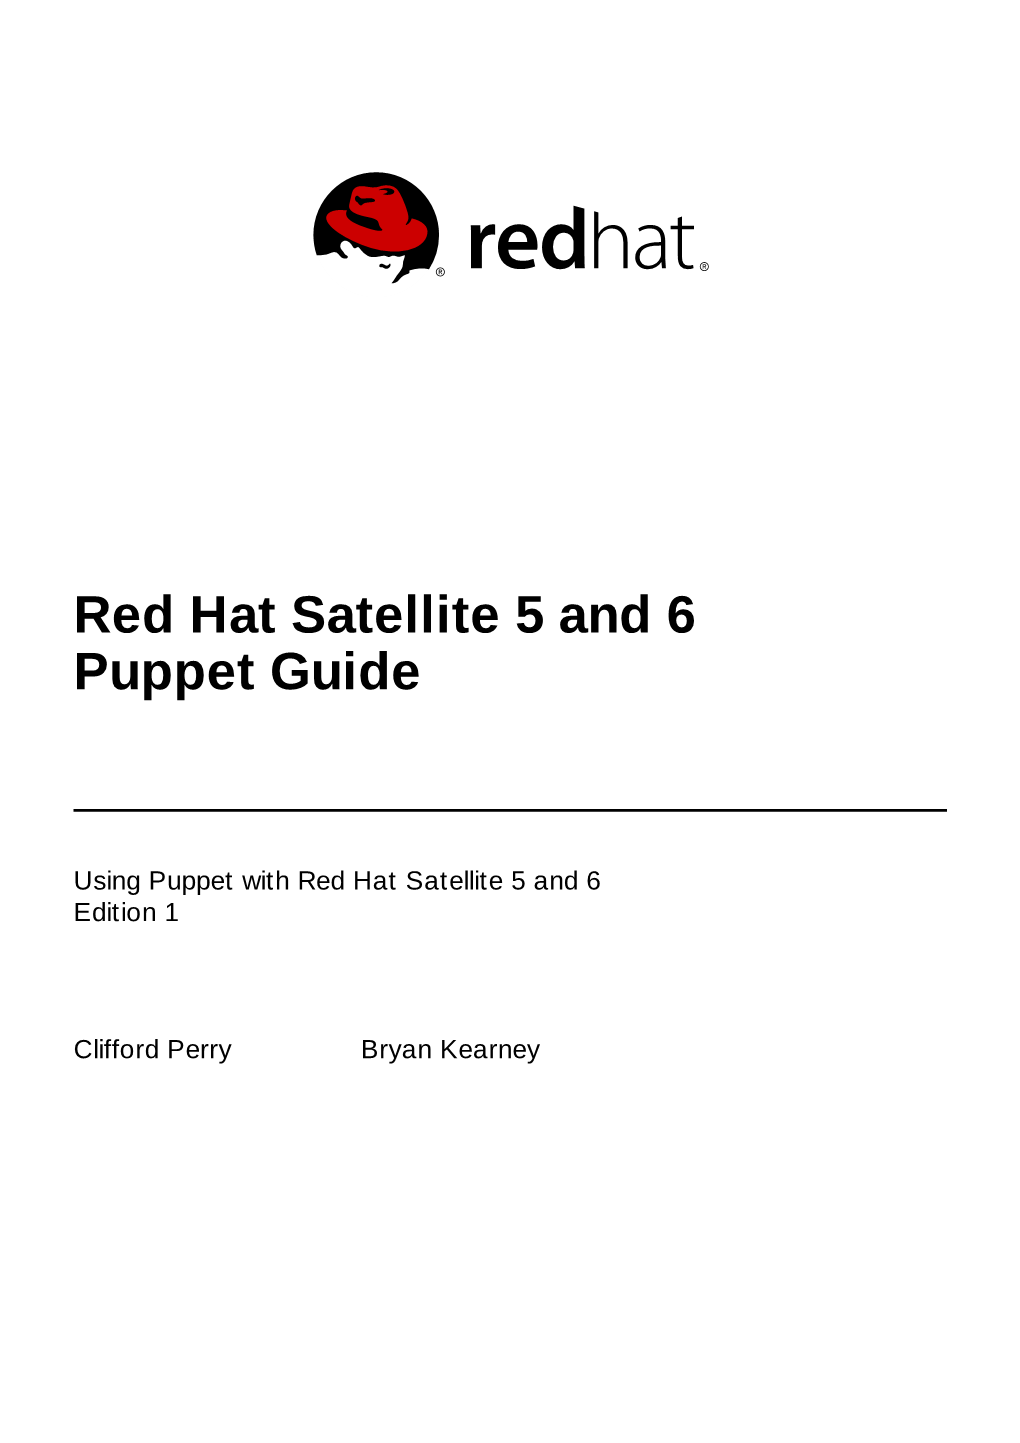 Red Hat Satellite 5 and 6 Puppet Guide